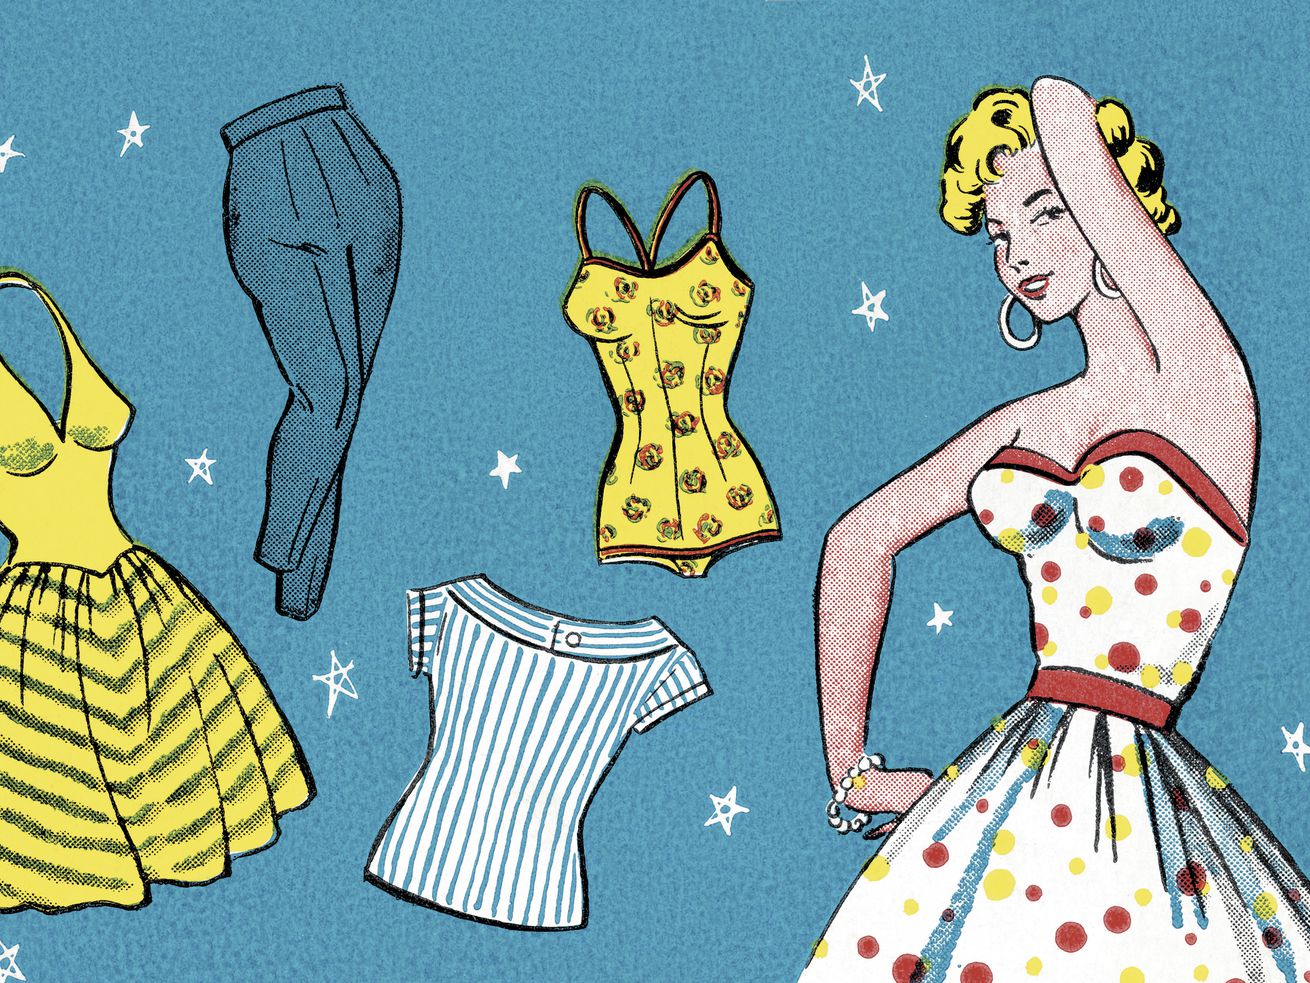 A vintage-like cartoon drawing of a woman in a strapless dress, next to various articles of clothing. 